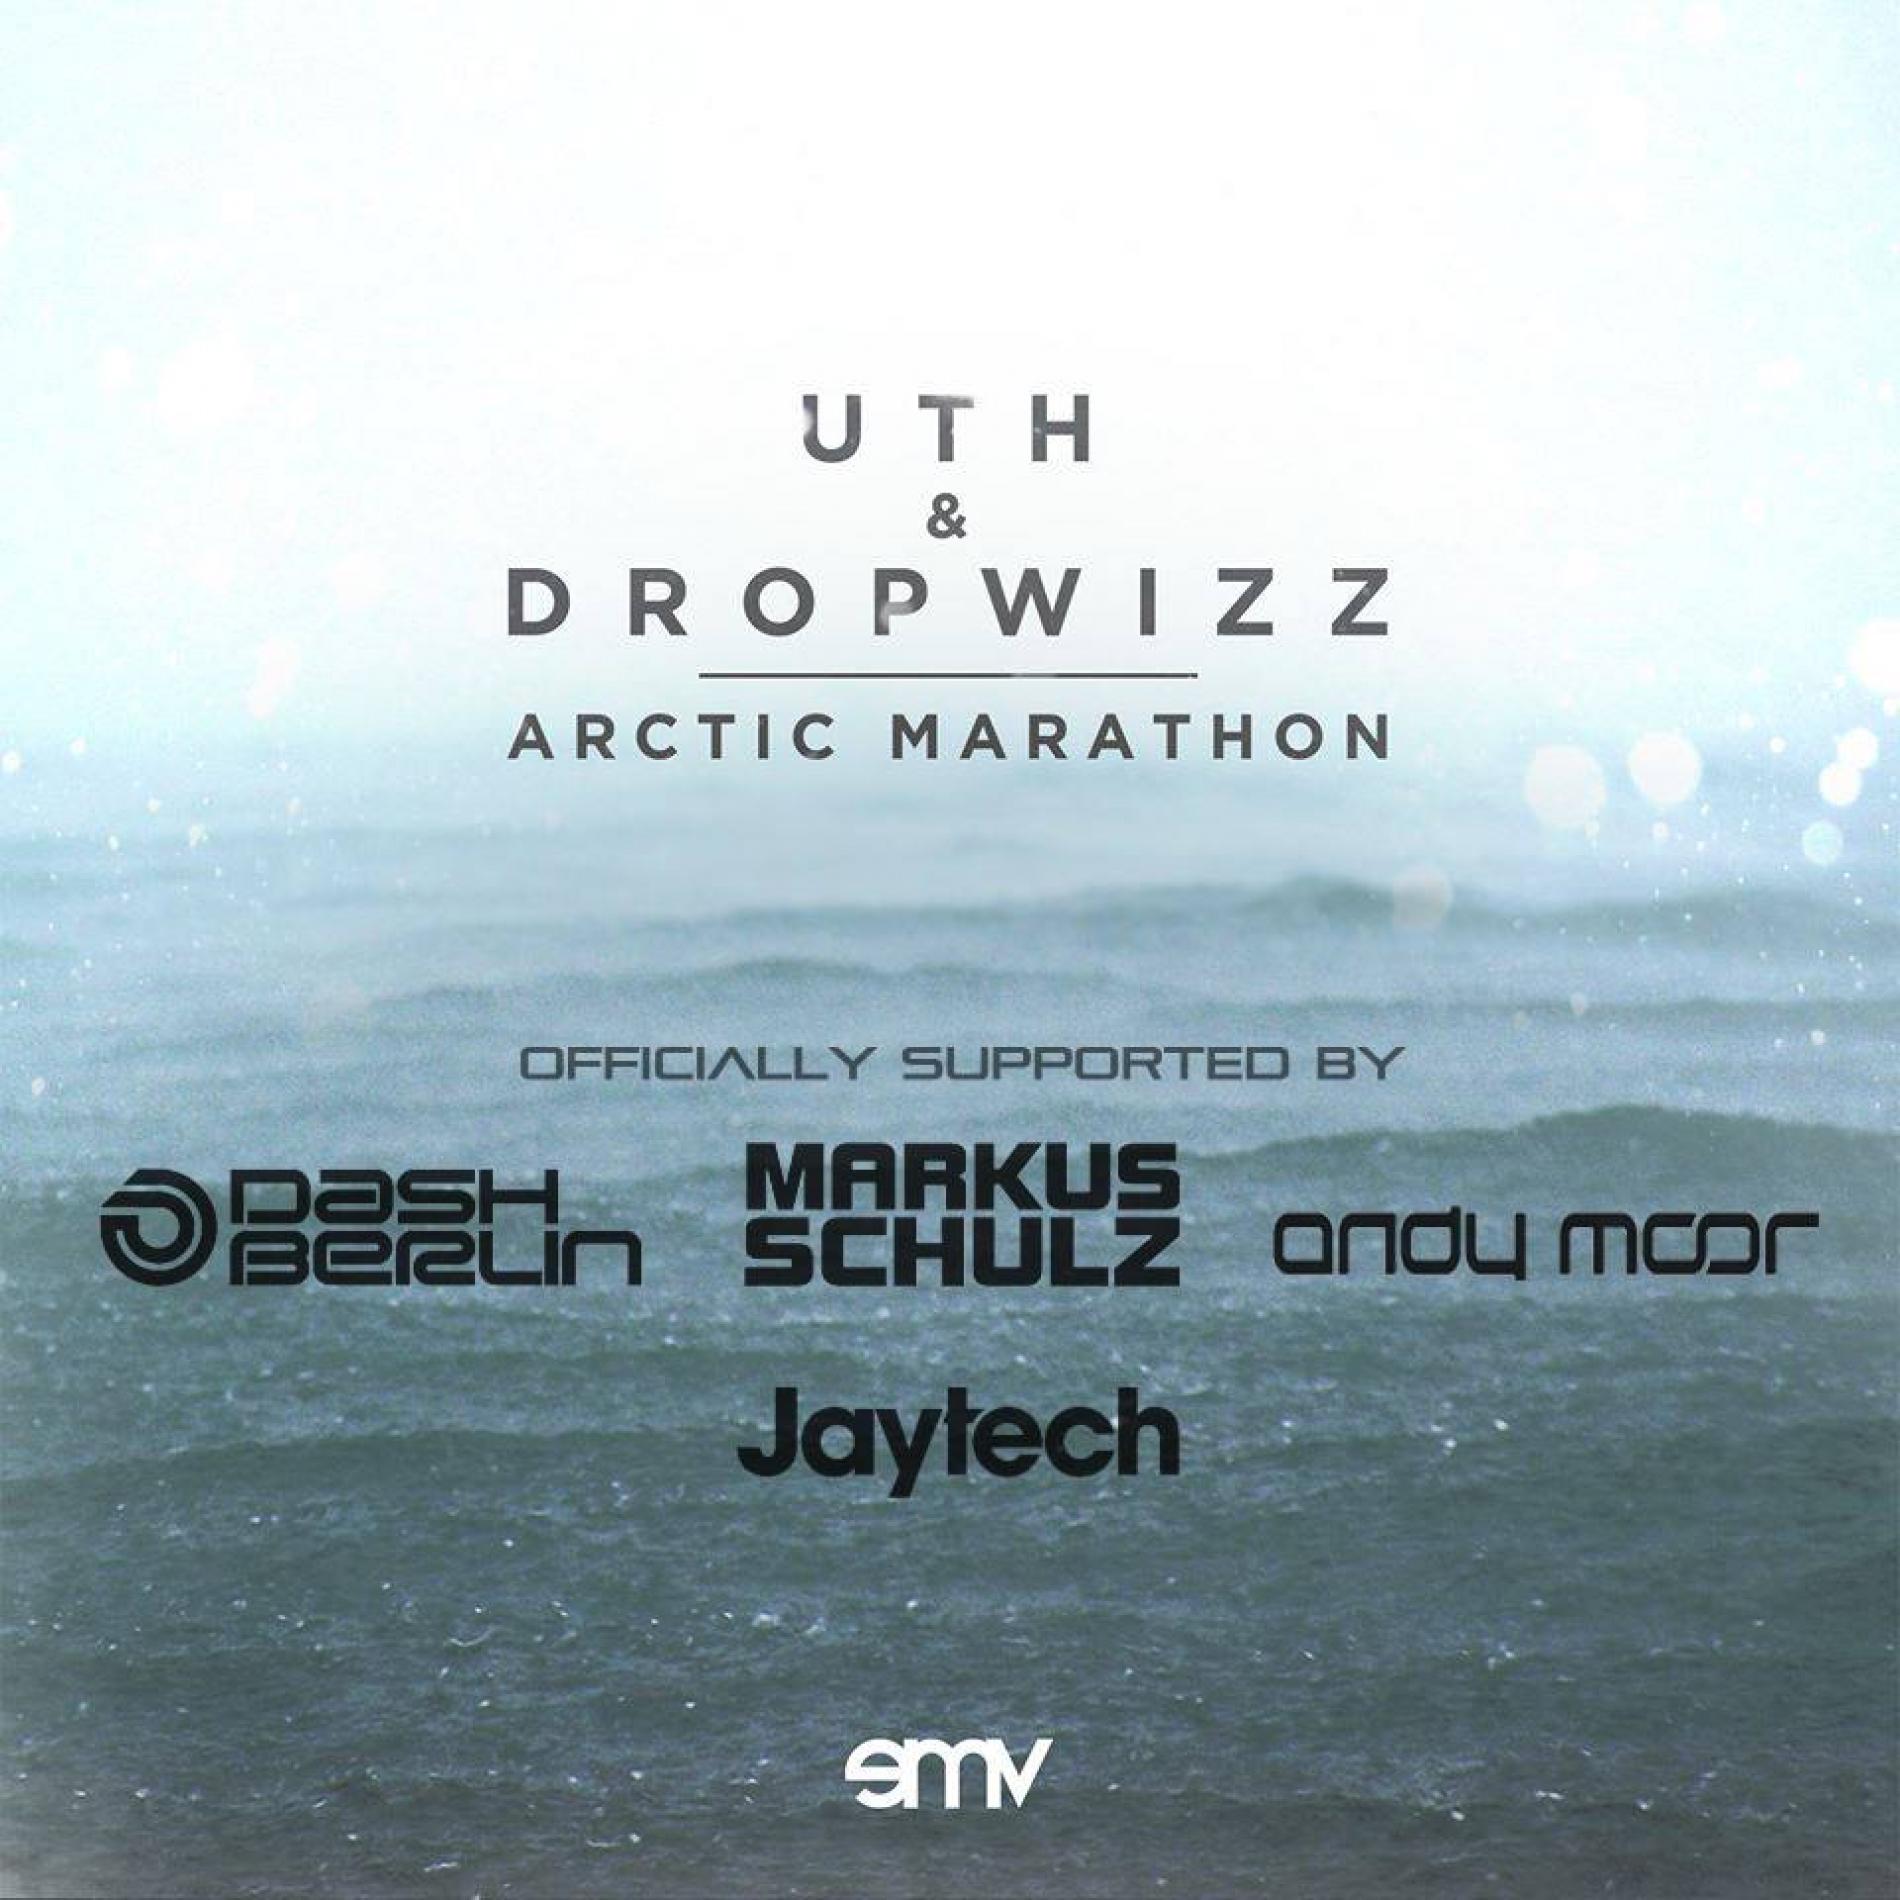 Dropwizz: On UTH & More